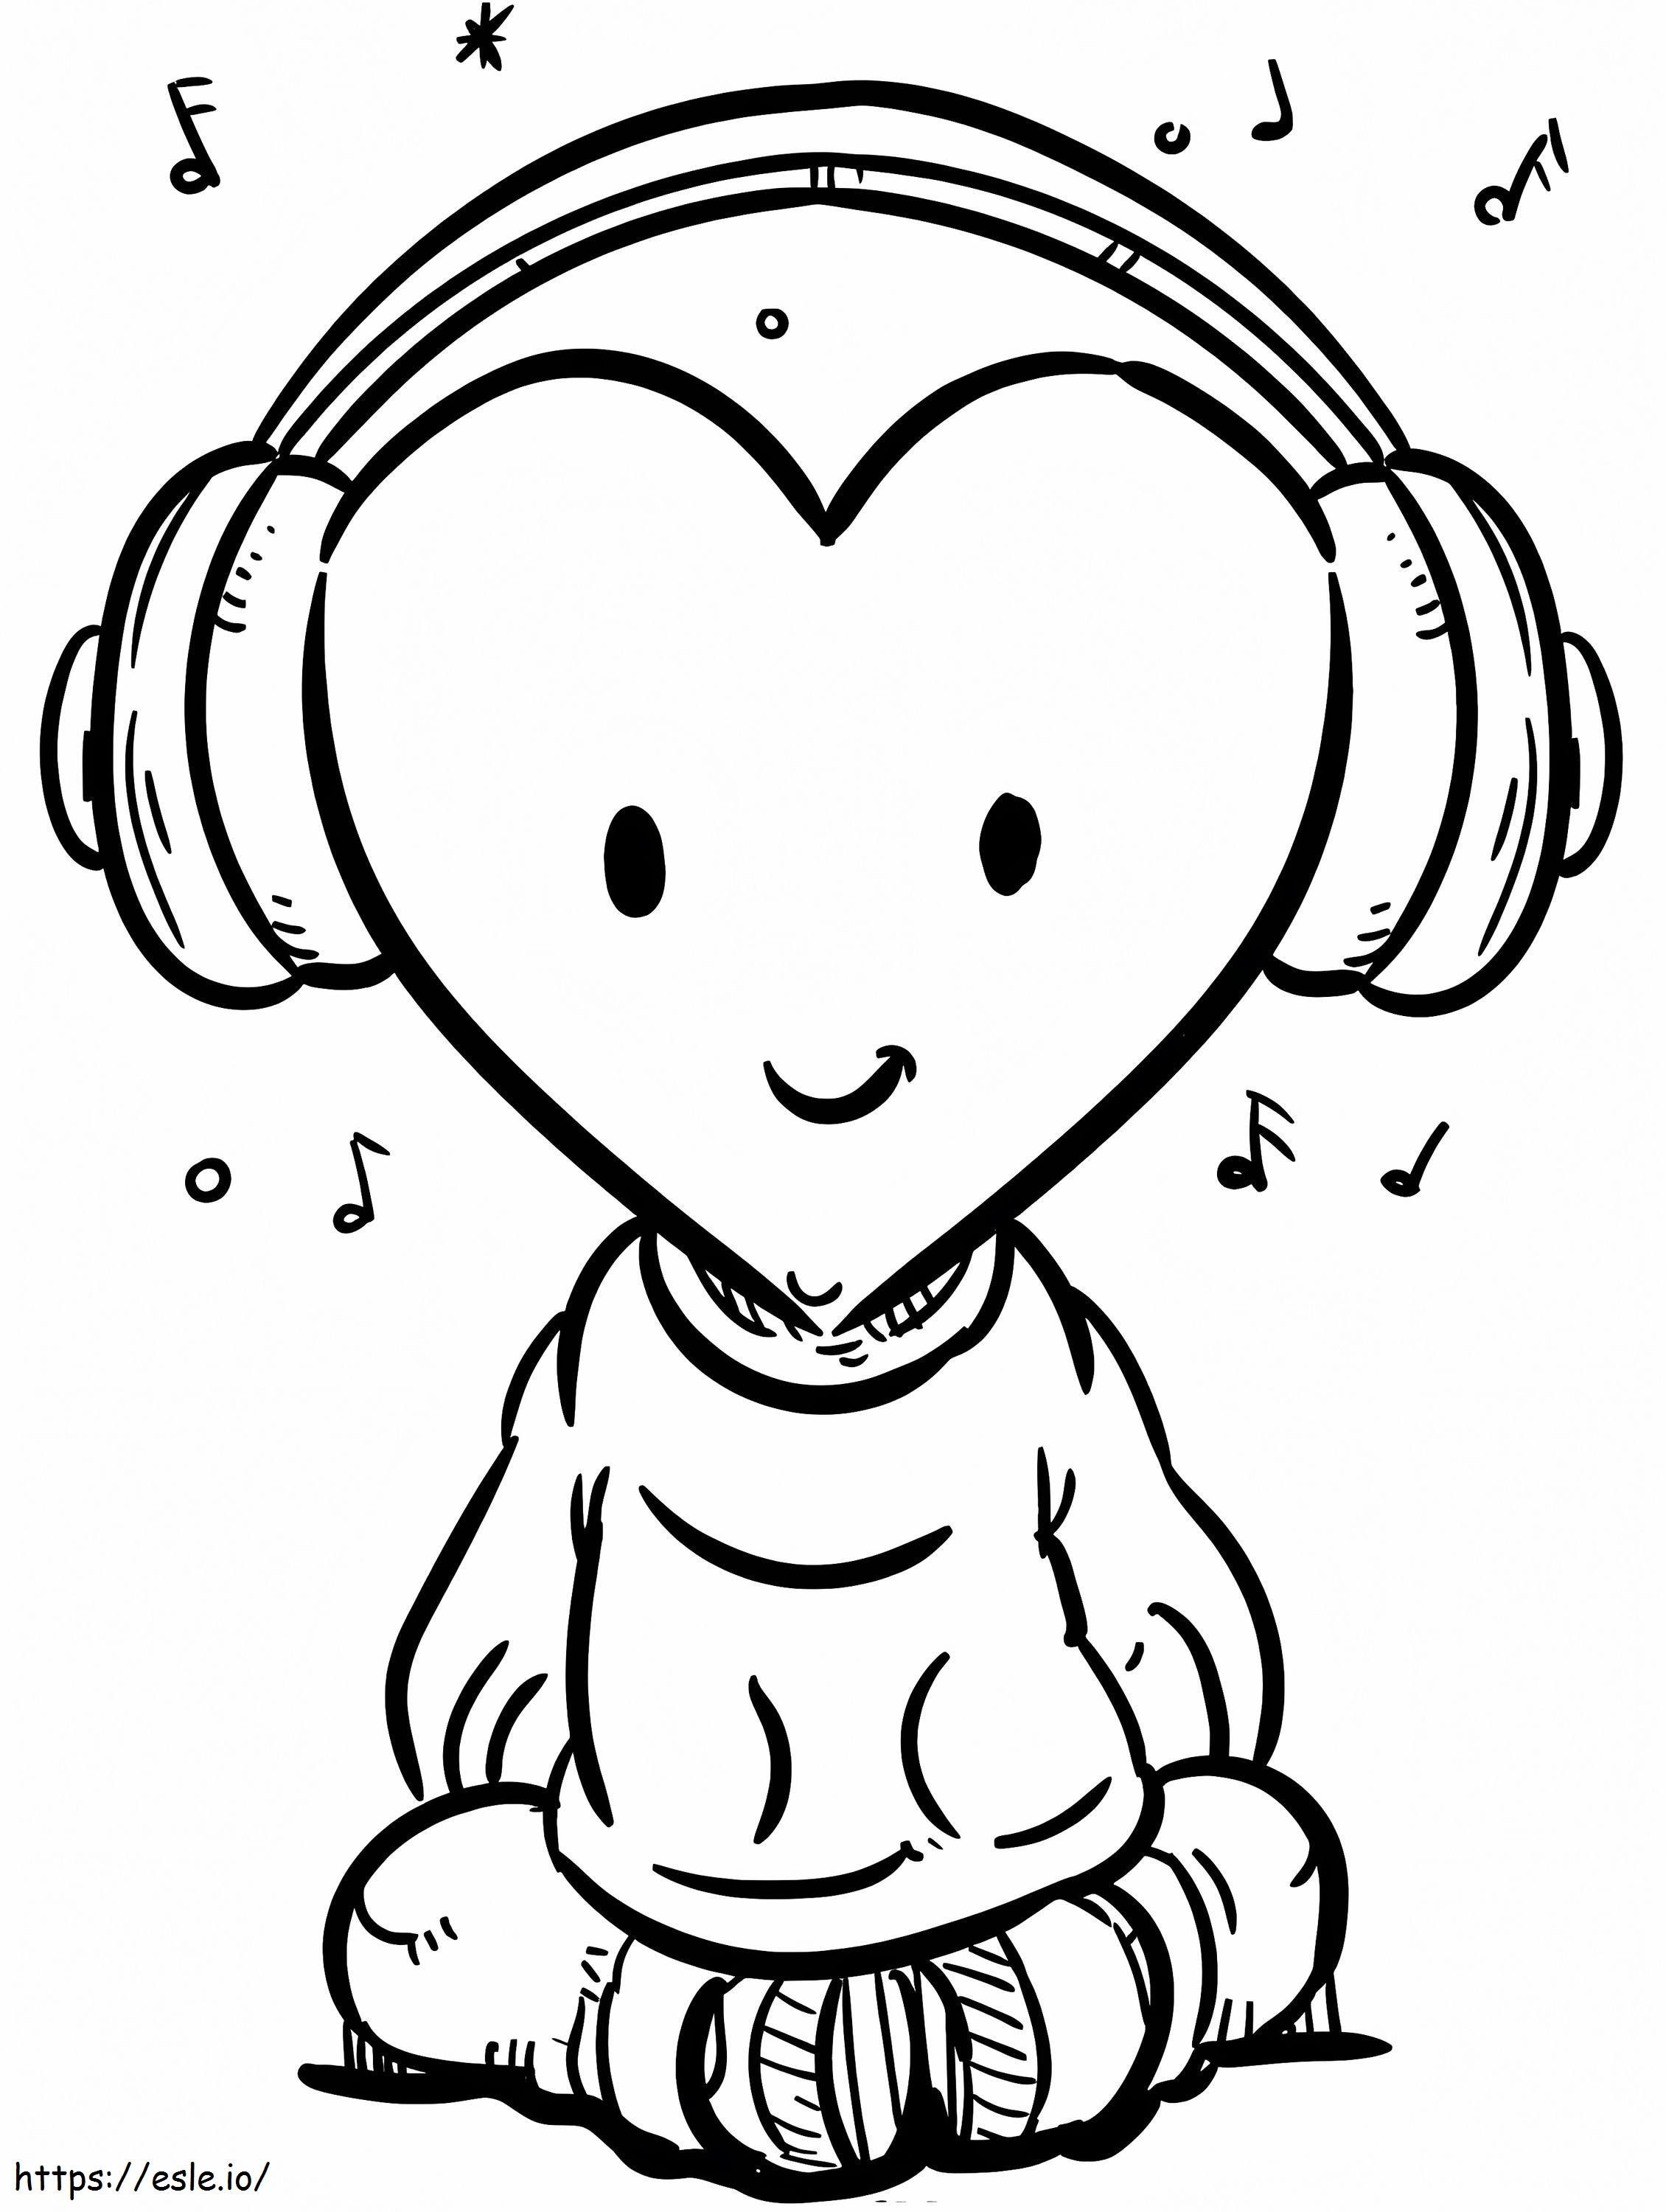 Heart Guy coloring page